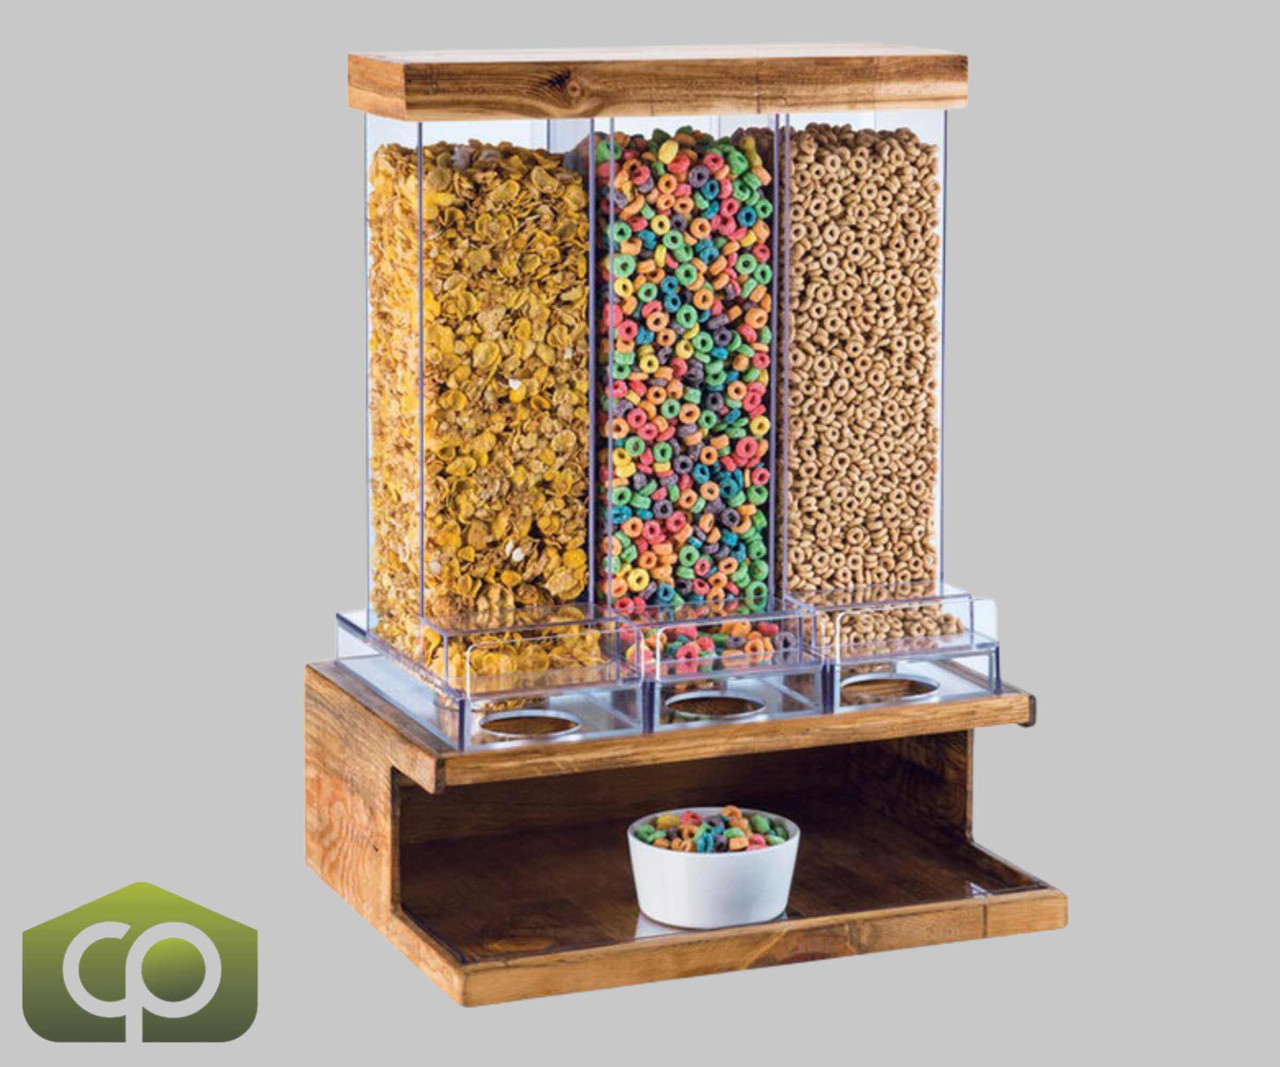 Cal-Mil Madera Rustic Pine 9.8 Liter Triple Canister Cereal Dispenser - Rustic Elegance for Your Breakfast Service